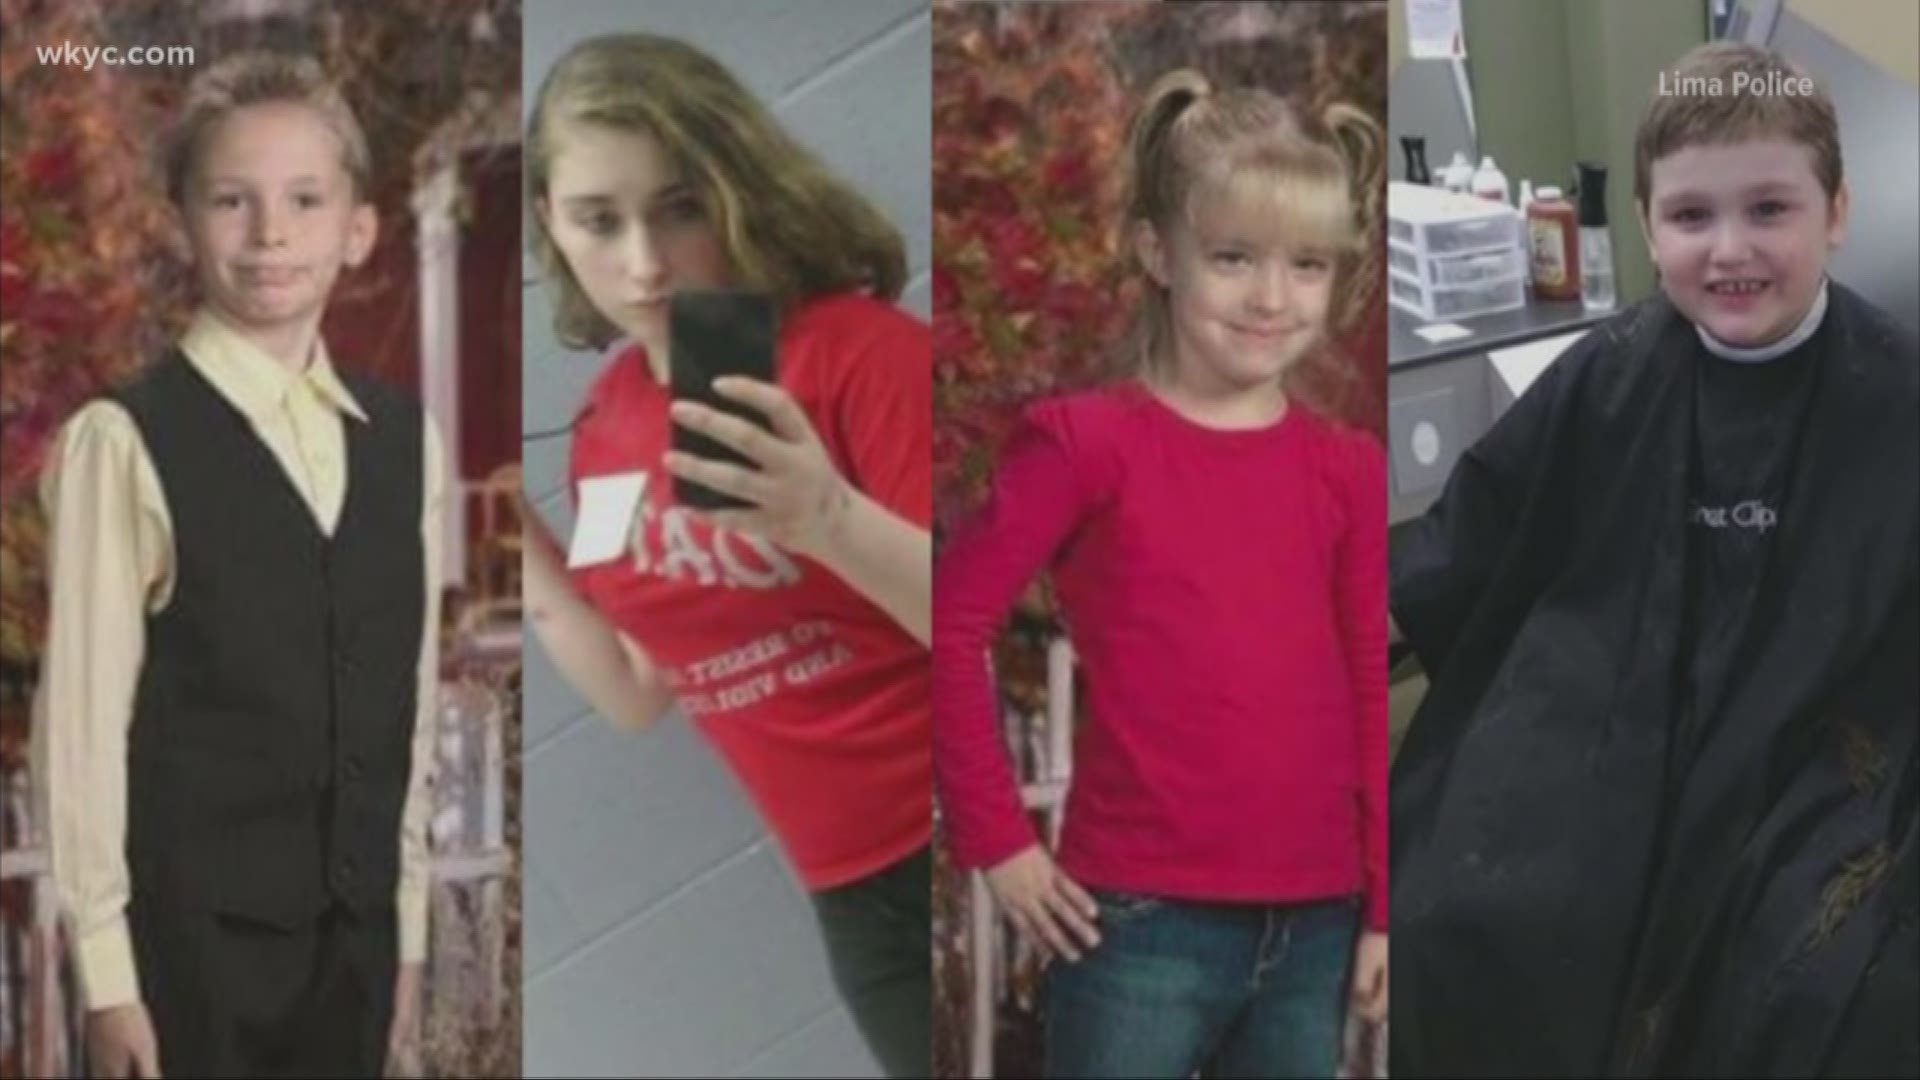 Aug. 28, 2018: A missing child alert has been issued for all states between Ohio and Florida as police say the kids -- ranging in age from 13 to 8 -- were taken by their non-custodial mother in Lima early Tuesday morning.